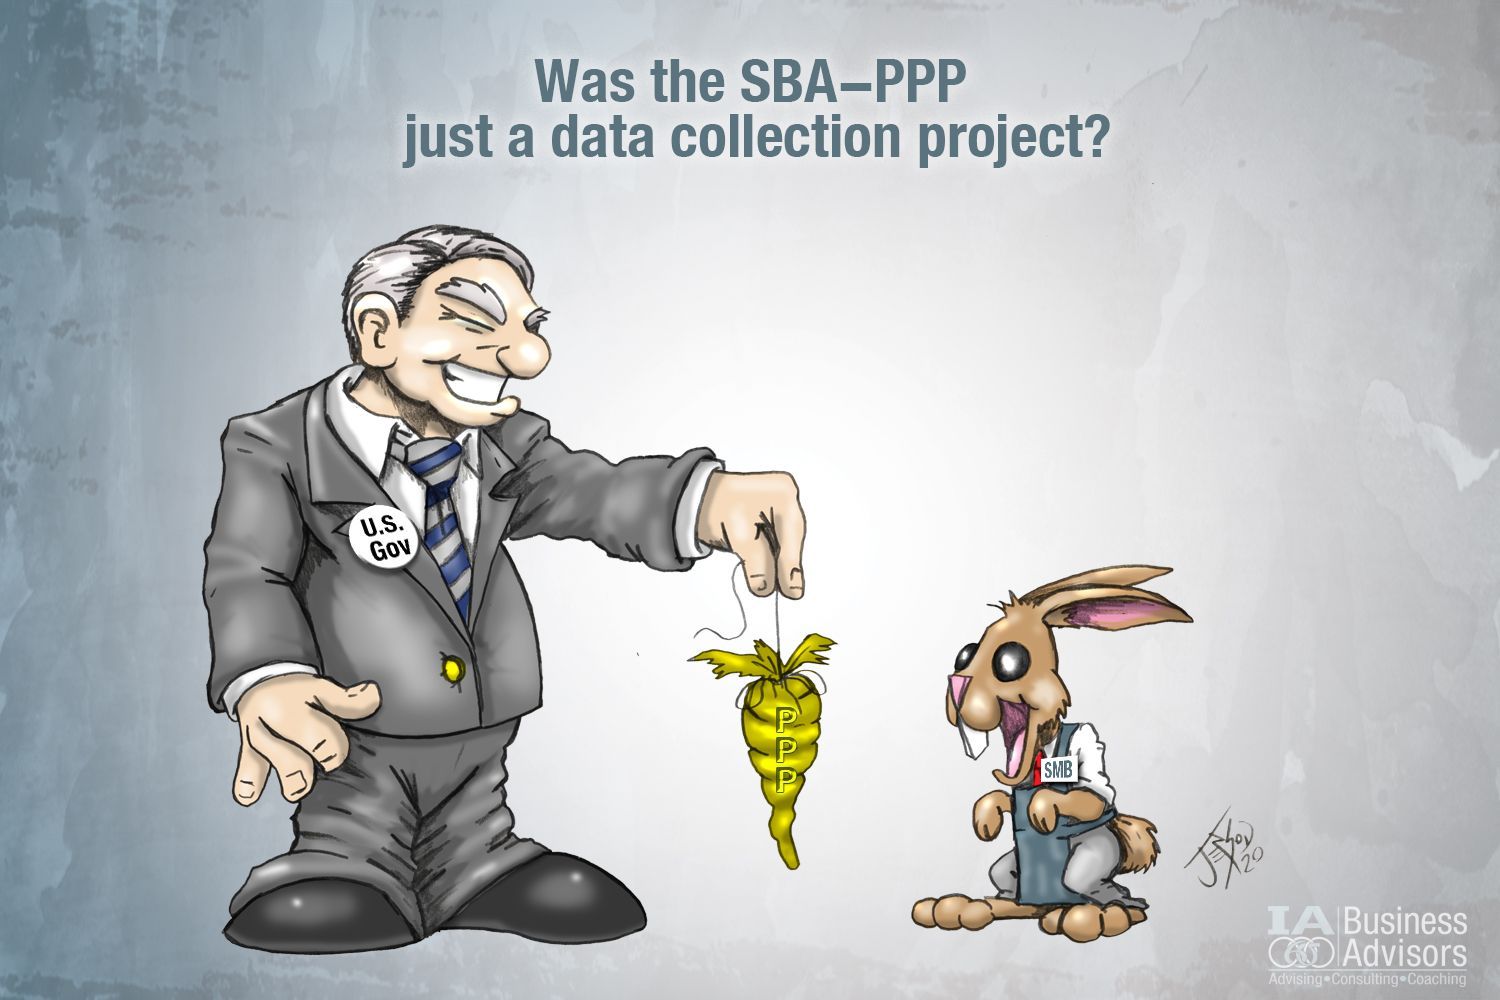 Was the SBA-PPP just a data collection project?